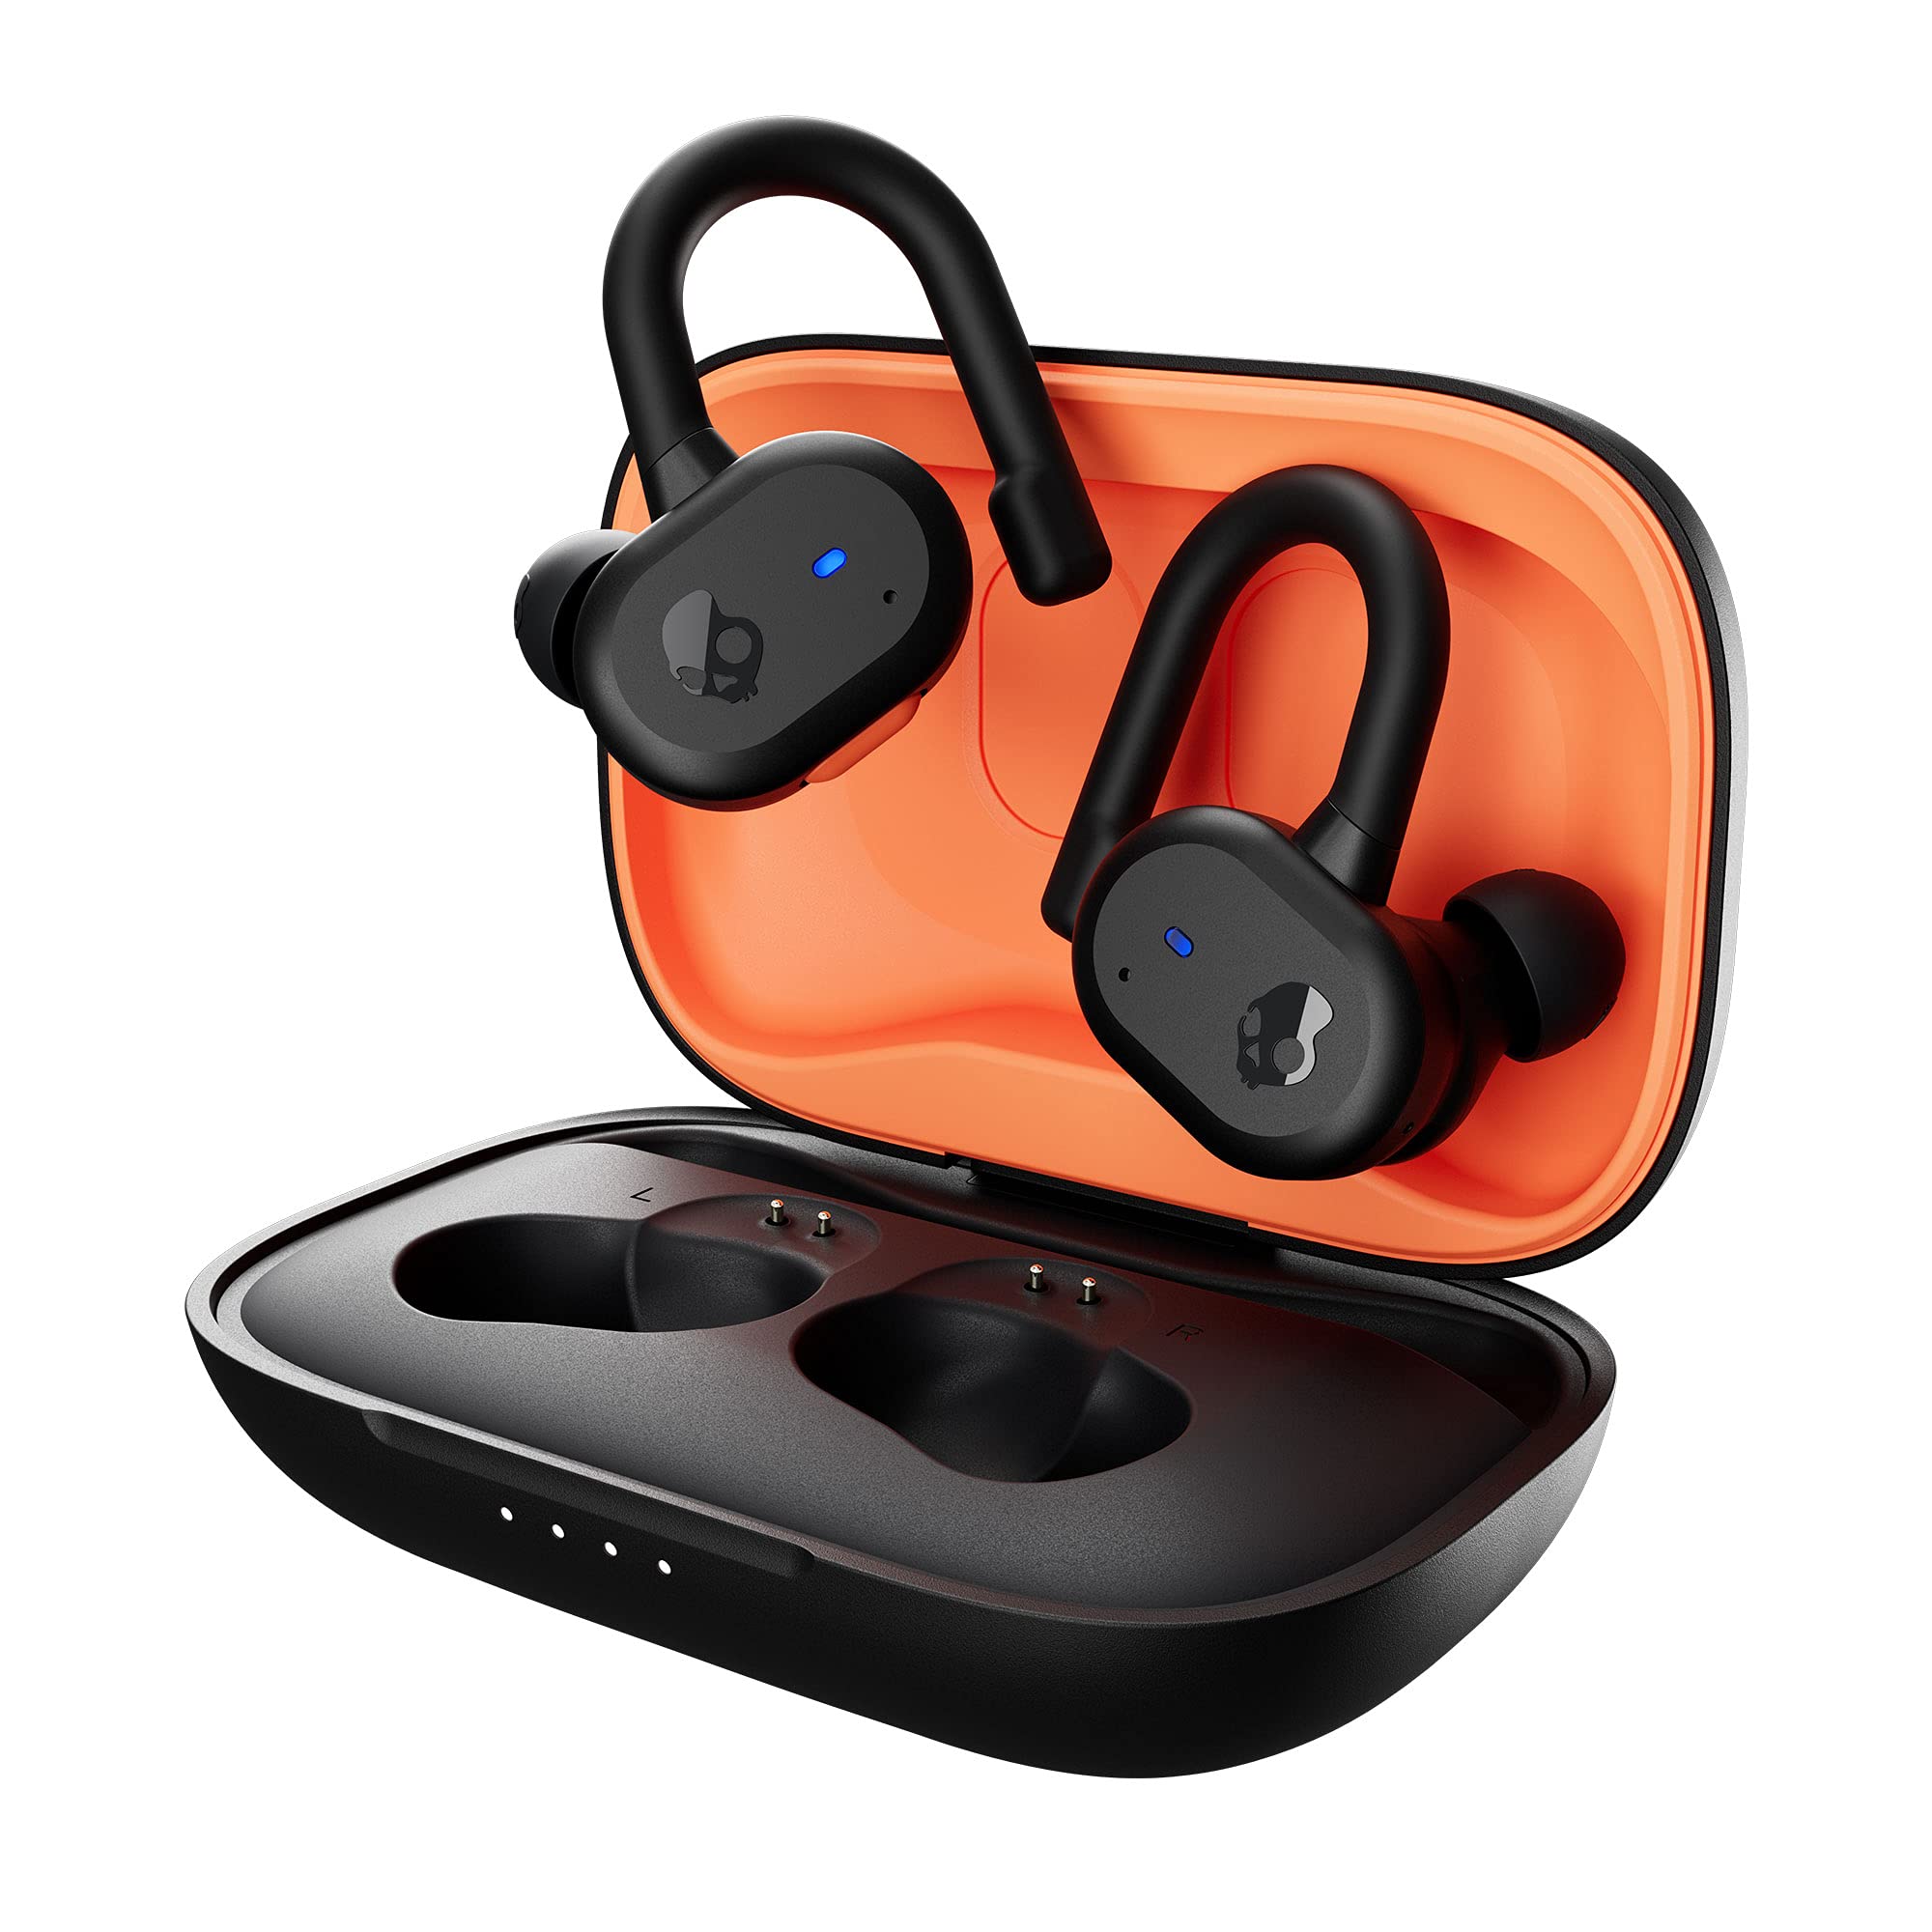 Skullcandy Push Active True Wireless In-Ear Bluetooth Earbud, Use with iPhone and Android with Charging Case and Mic, Great for Gym, Sports, and Gaming, IP55 Water and Dust Resistant - Orange/Black